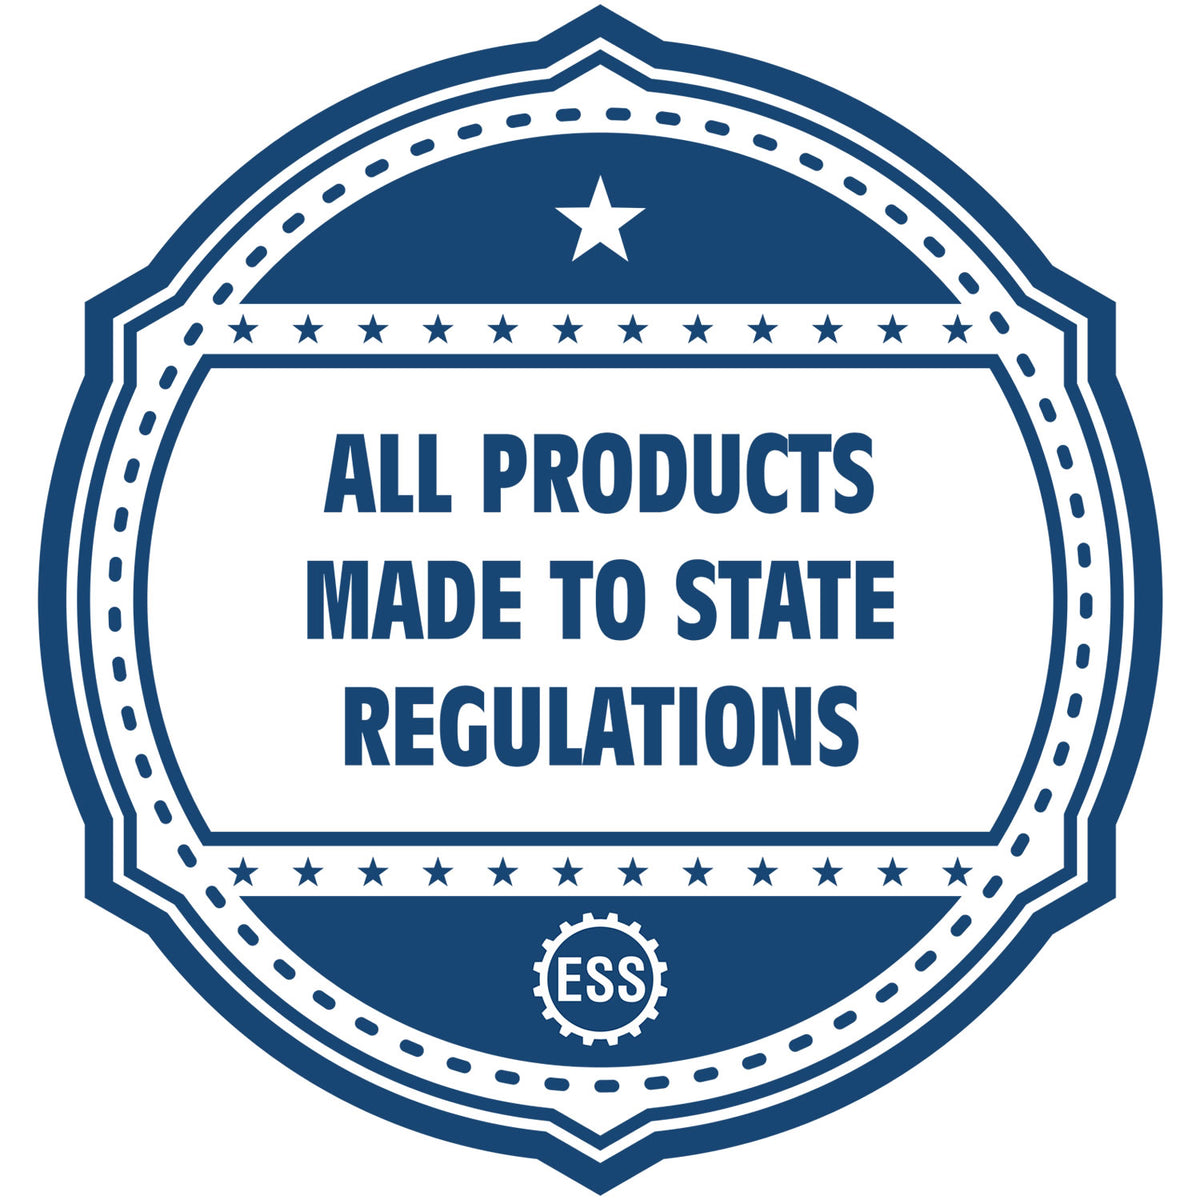 A blue icon or badge for the North Carolina Professional Geologist Seal Stamp showing that this product is made in compliance with state regulations.